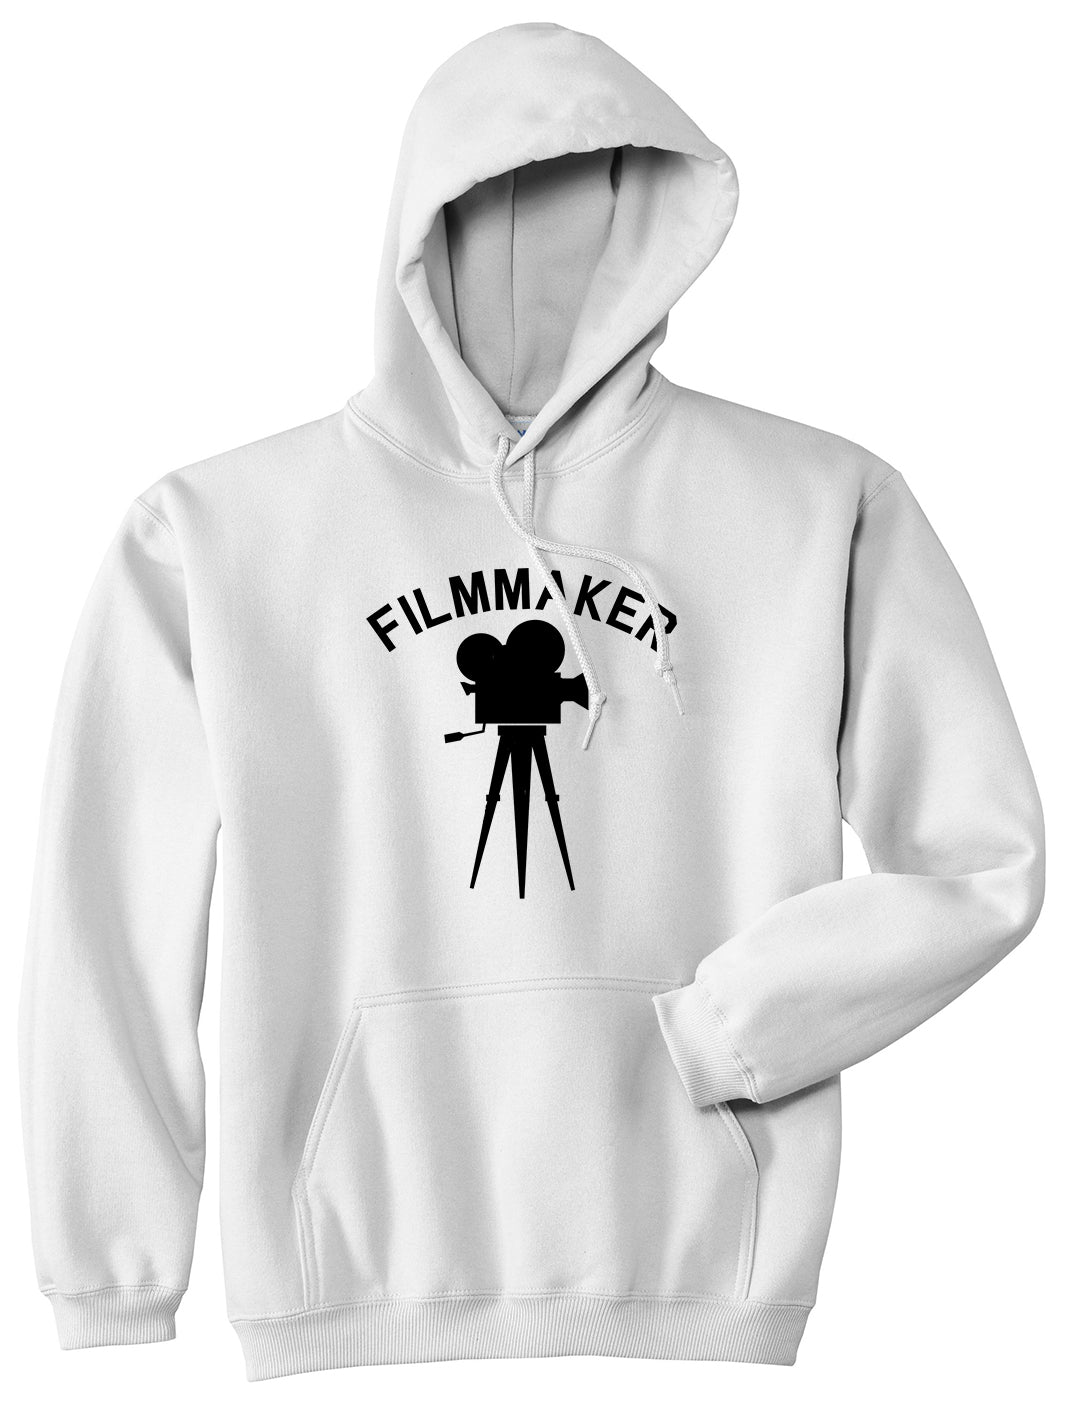 Filmmaker Camera Mens White Pullover Hoodie by KINGS OF NY